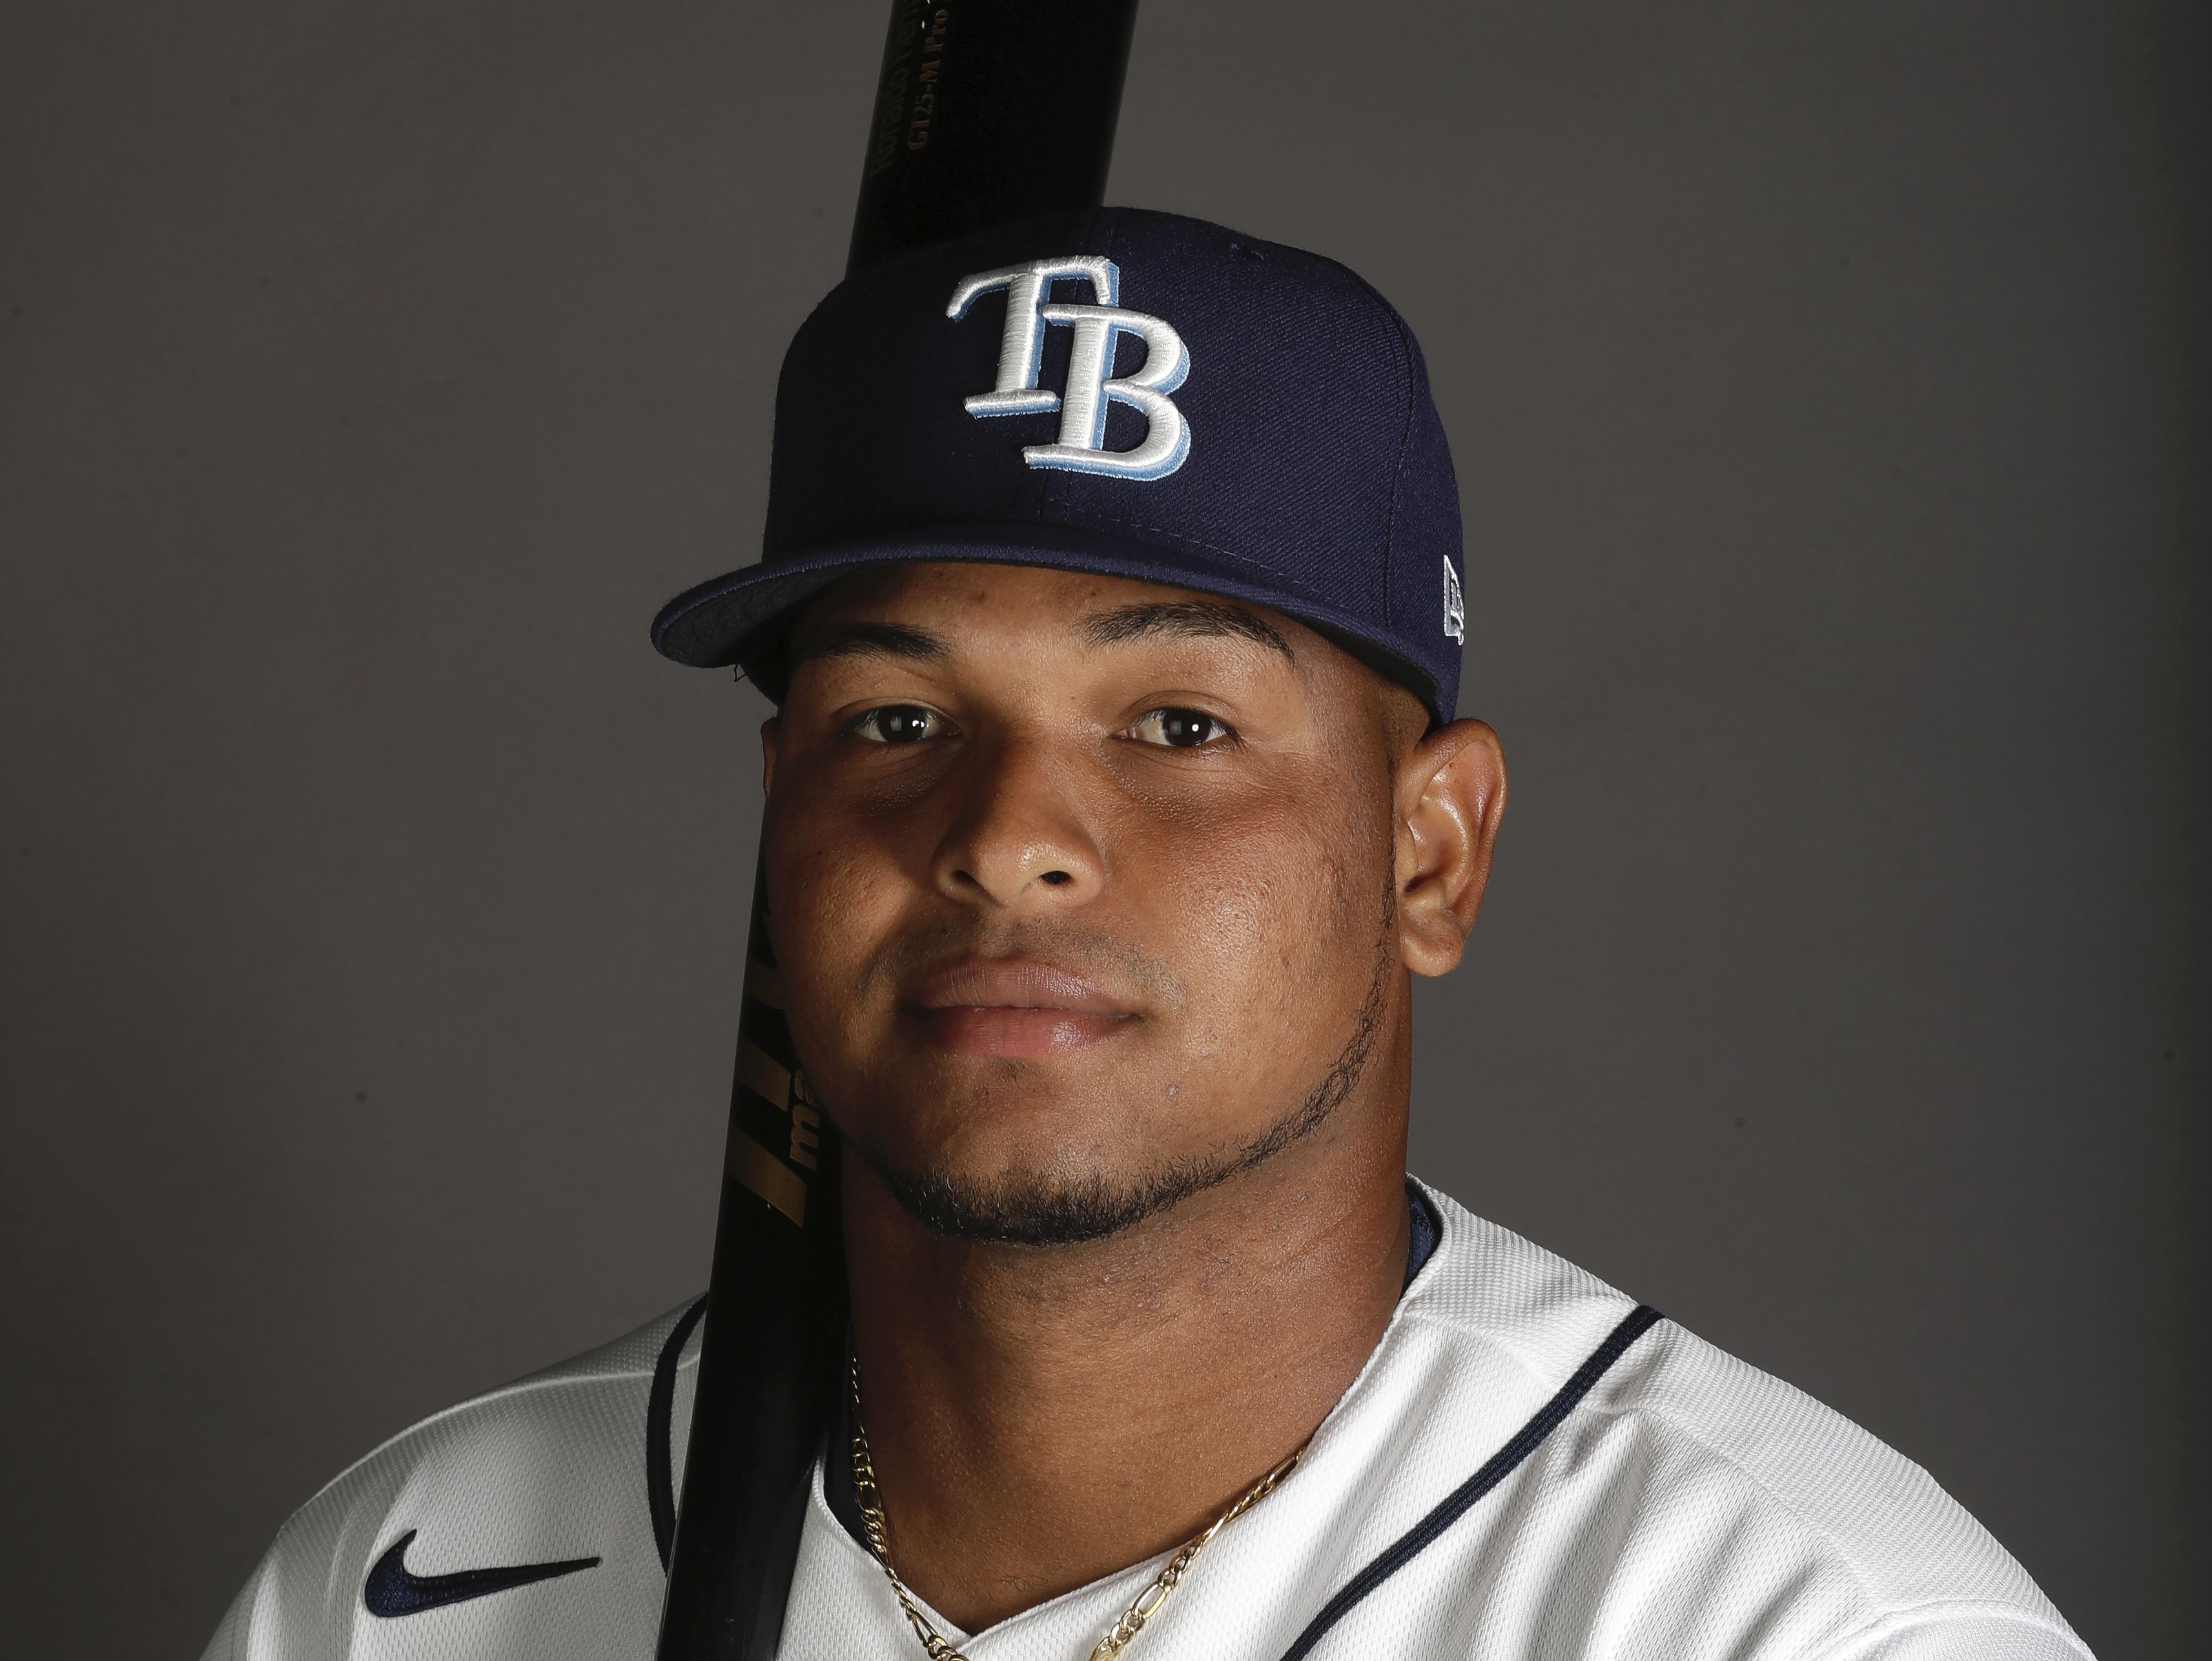 Rays trade catcher Ronaldo Hernandez to Red Sox for 2 pitchers